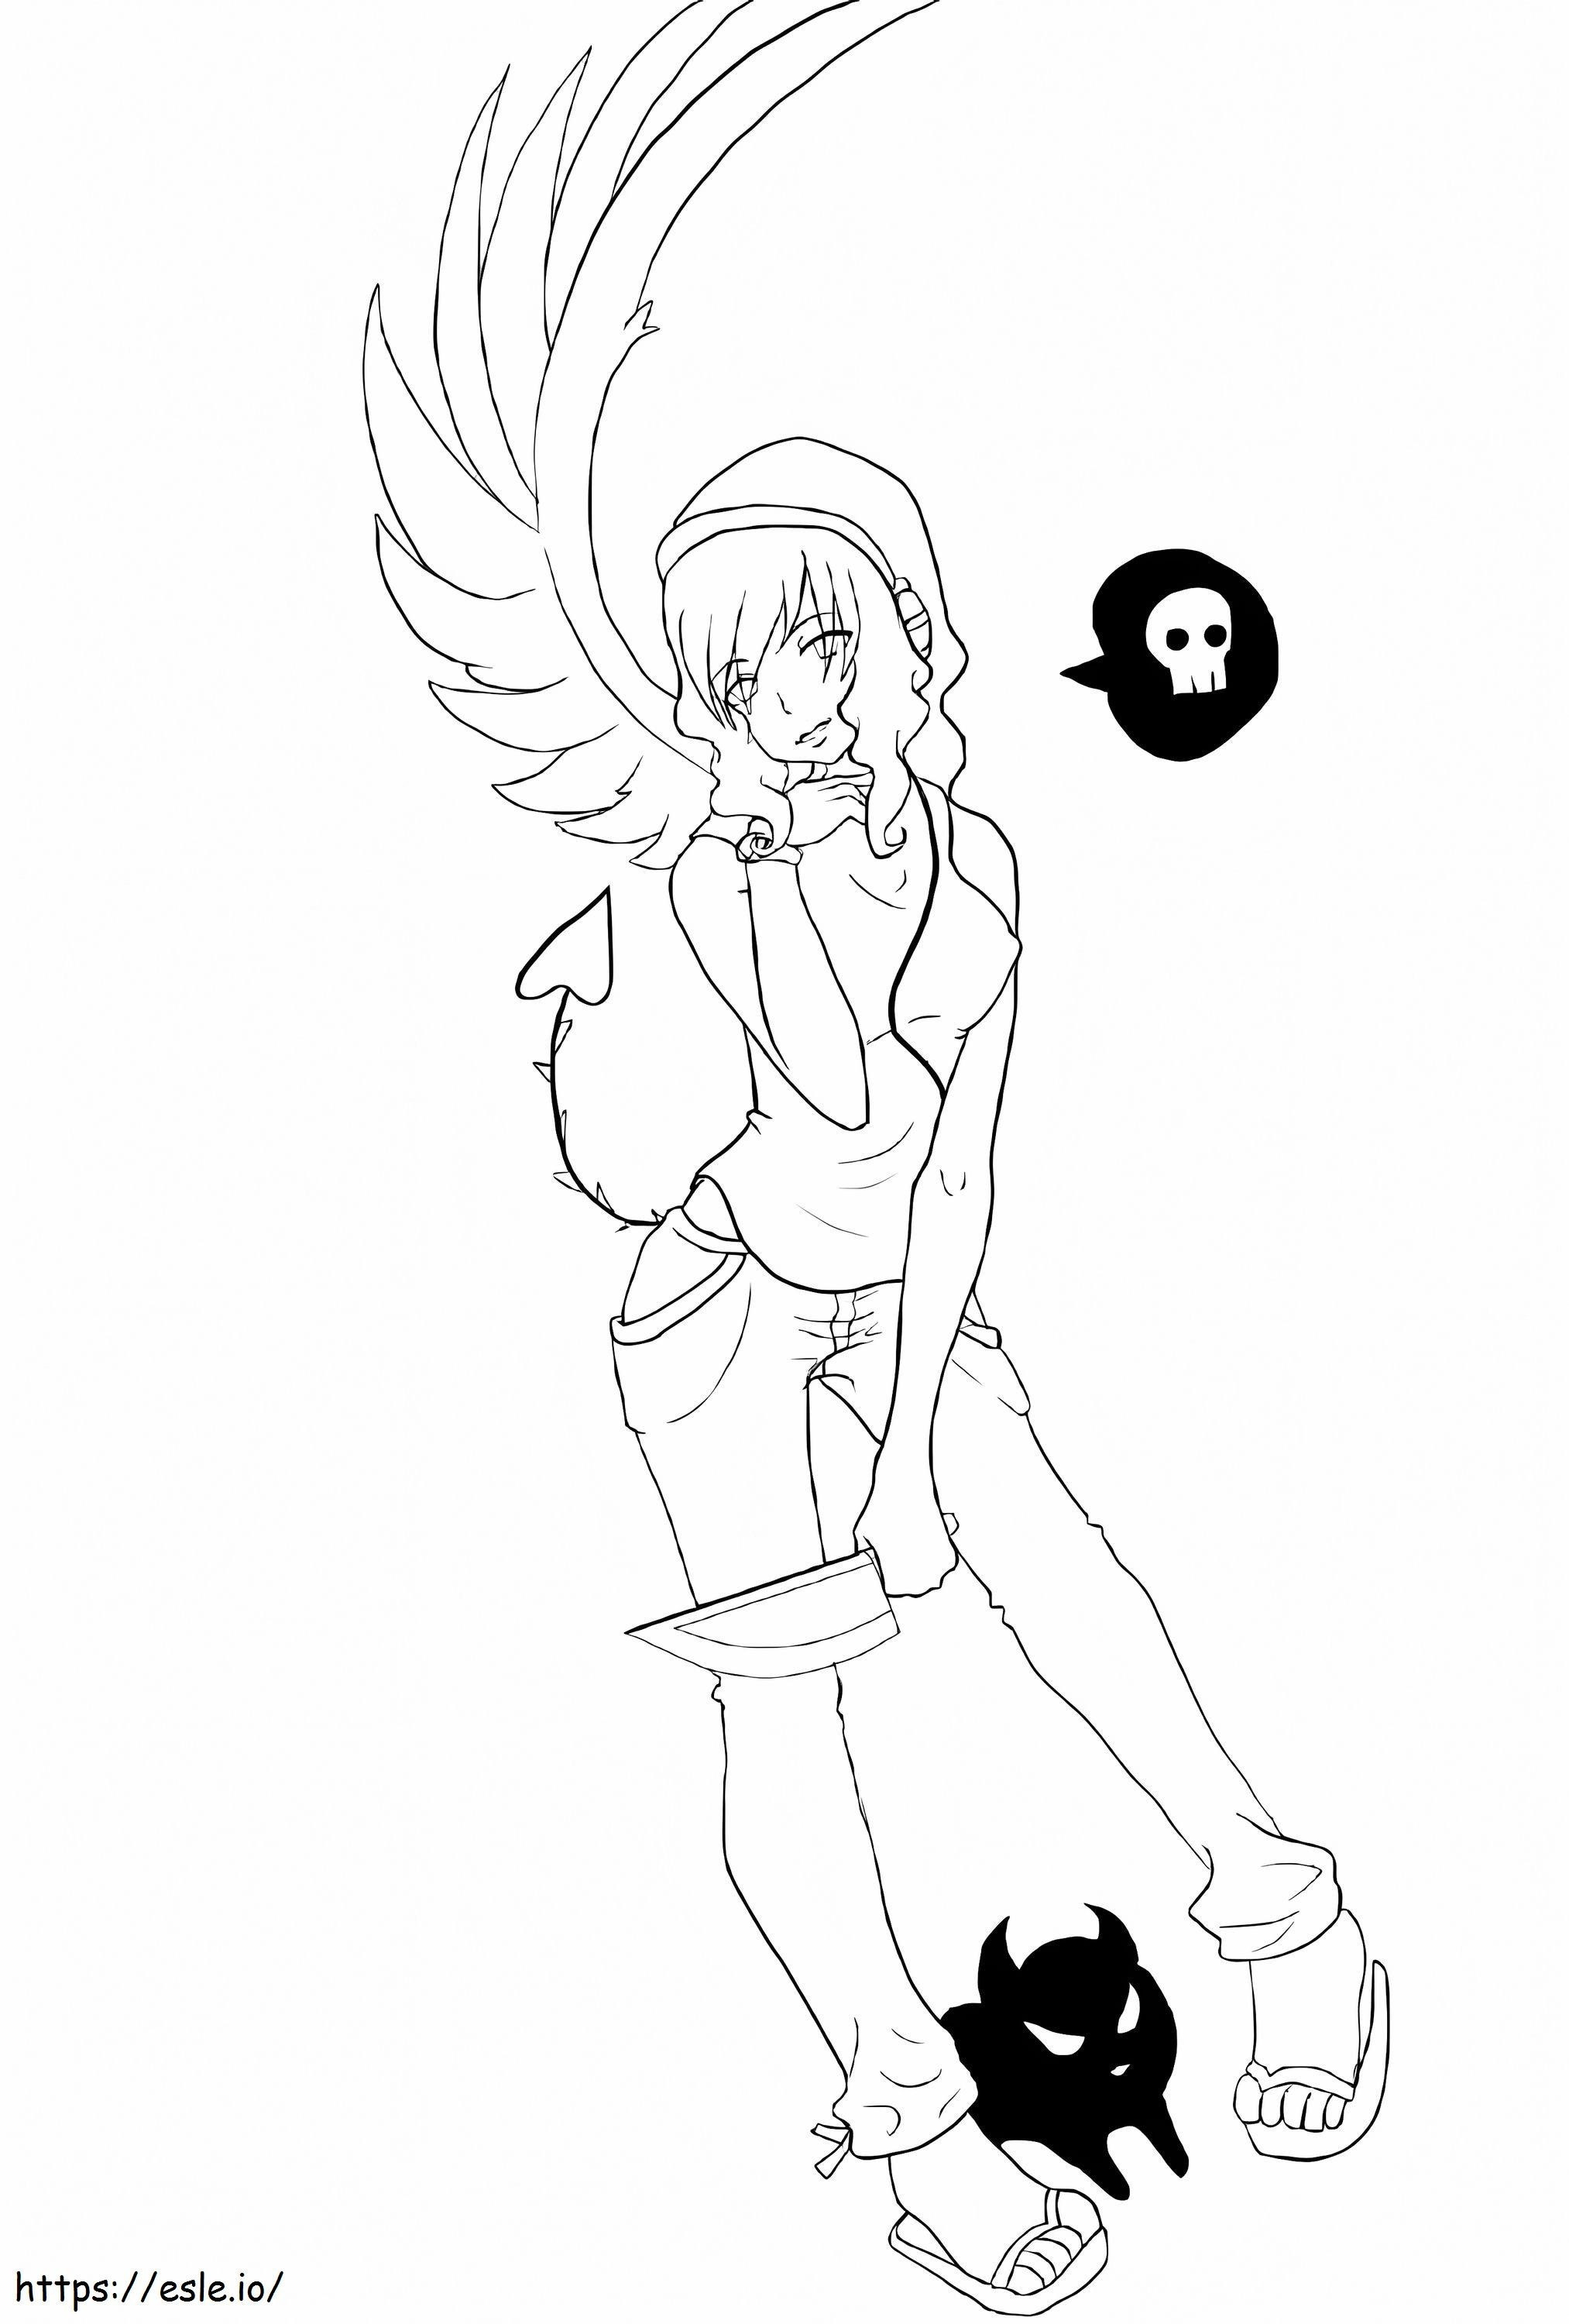 Anime Devil Girl coloring page